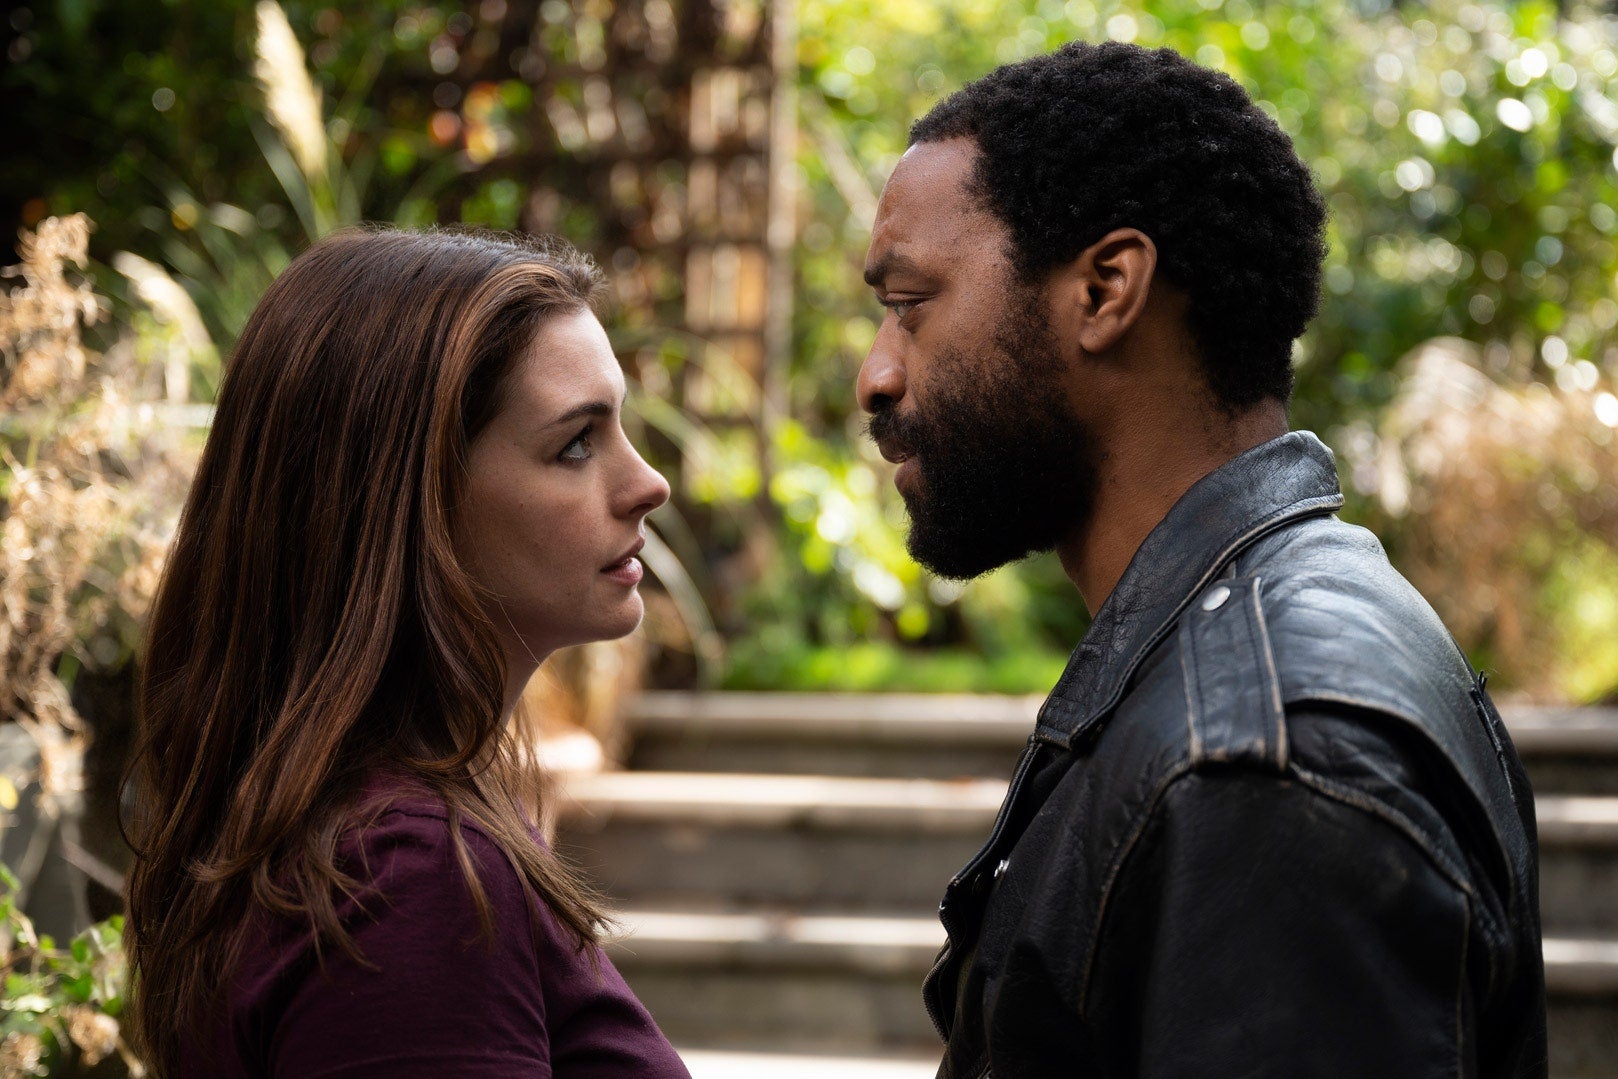 Anne Hathaway and Chiwetel Ejiofor play a recently separated couple trapped at home in ‘Locked Down’